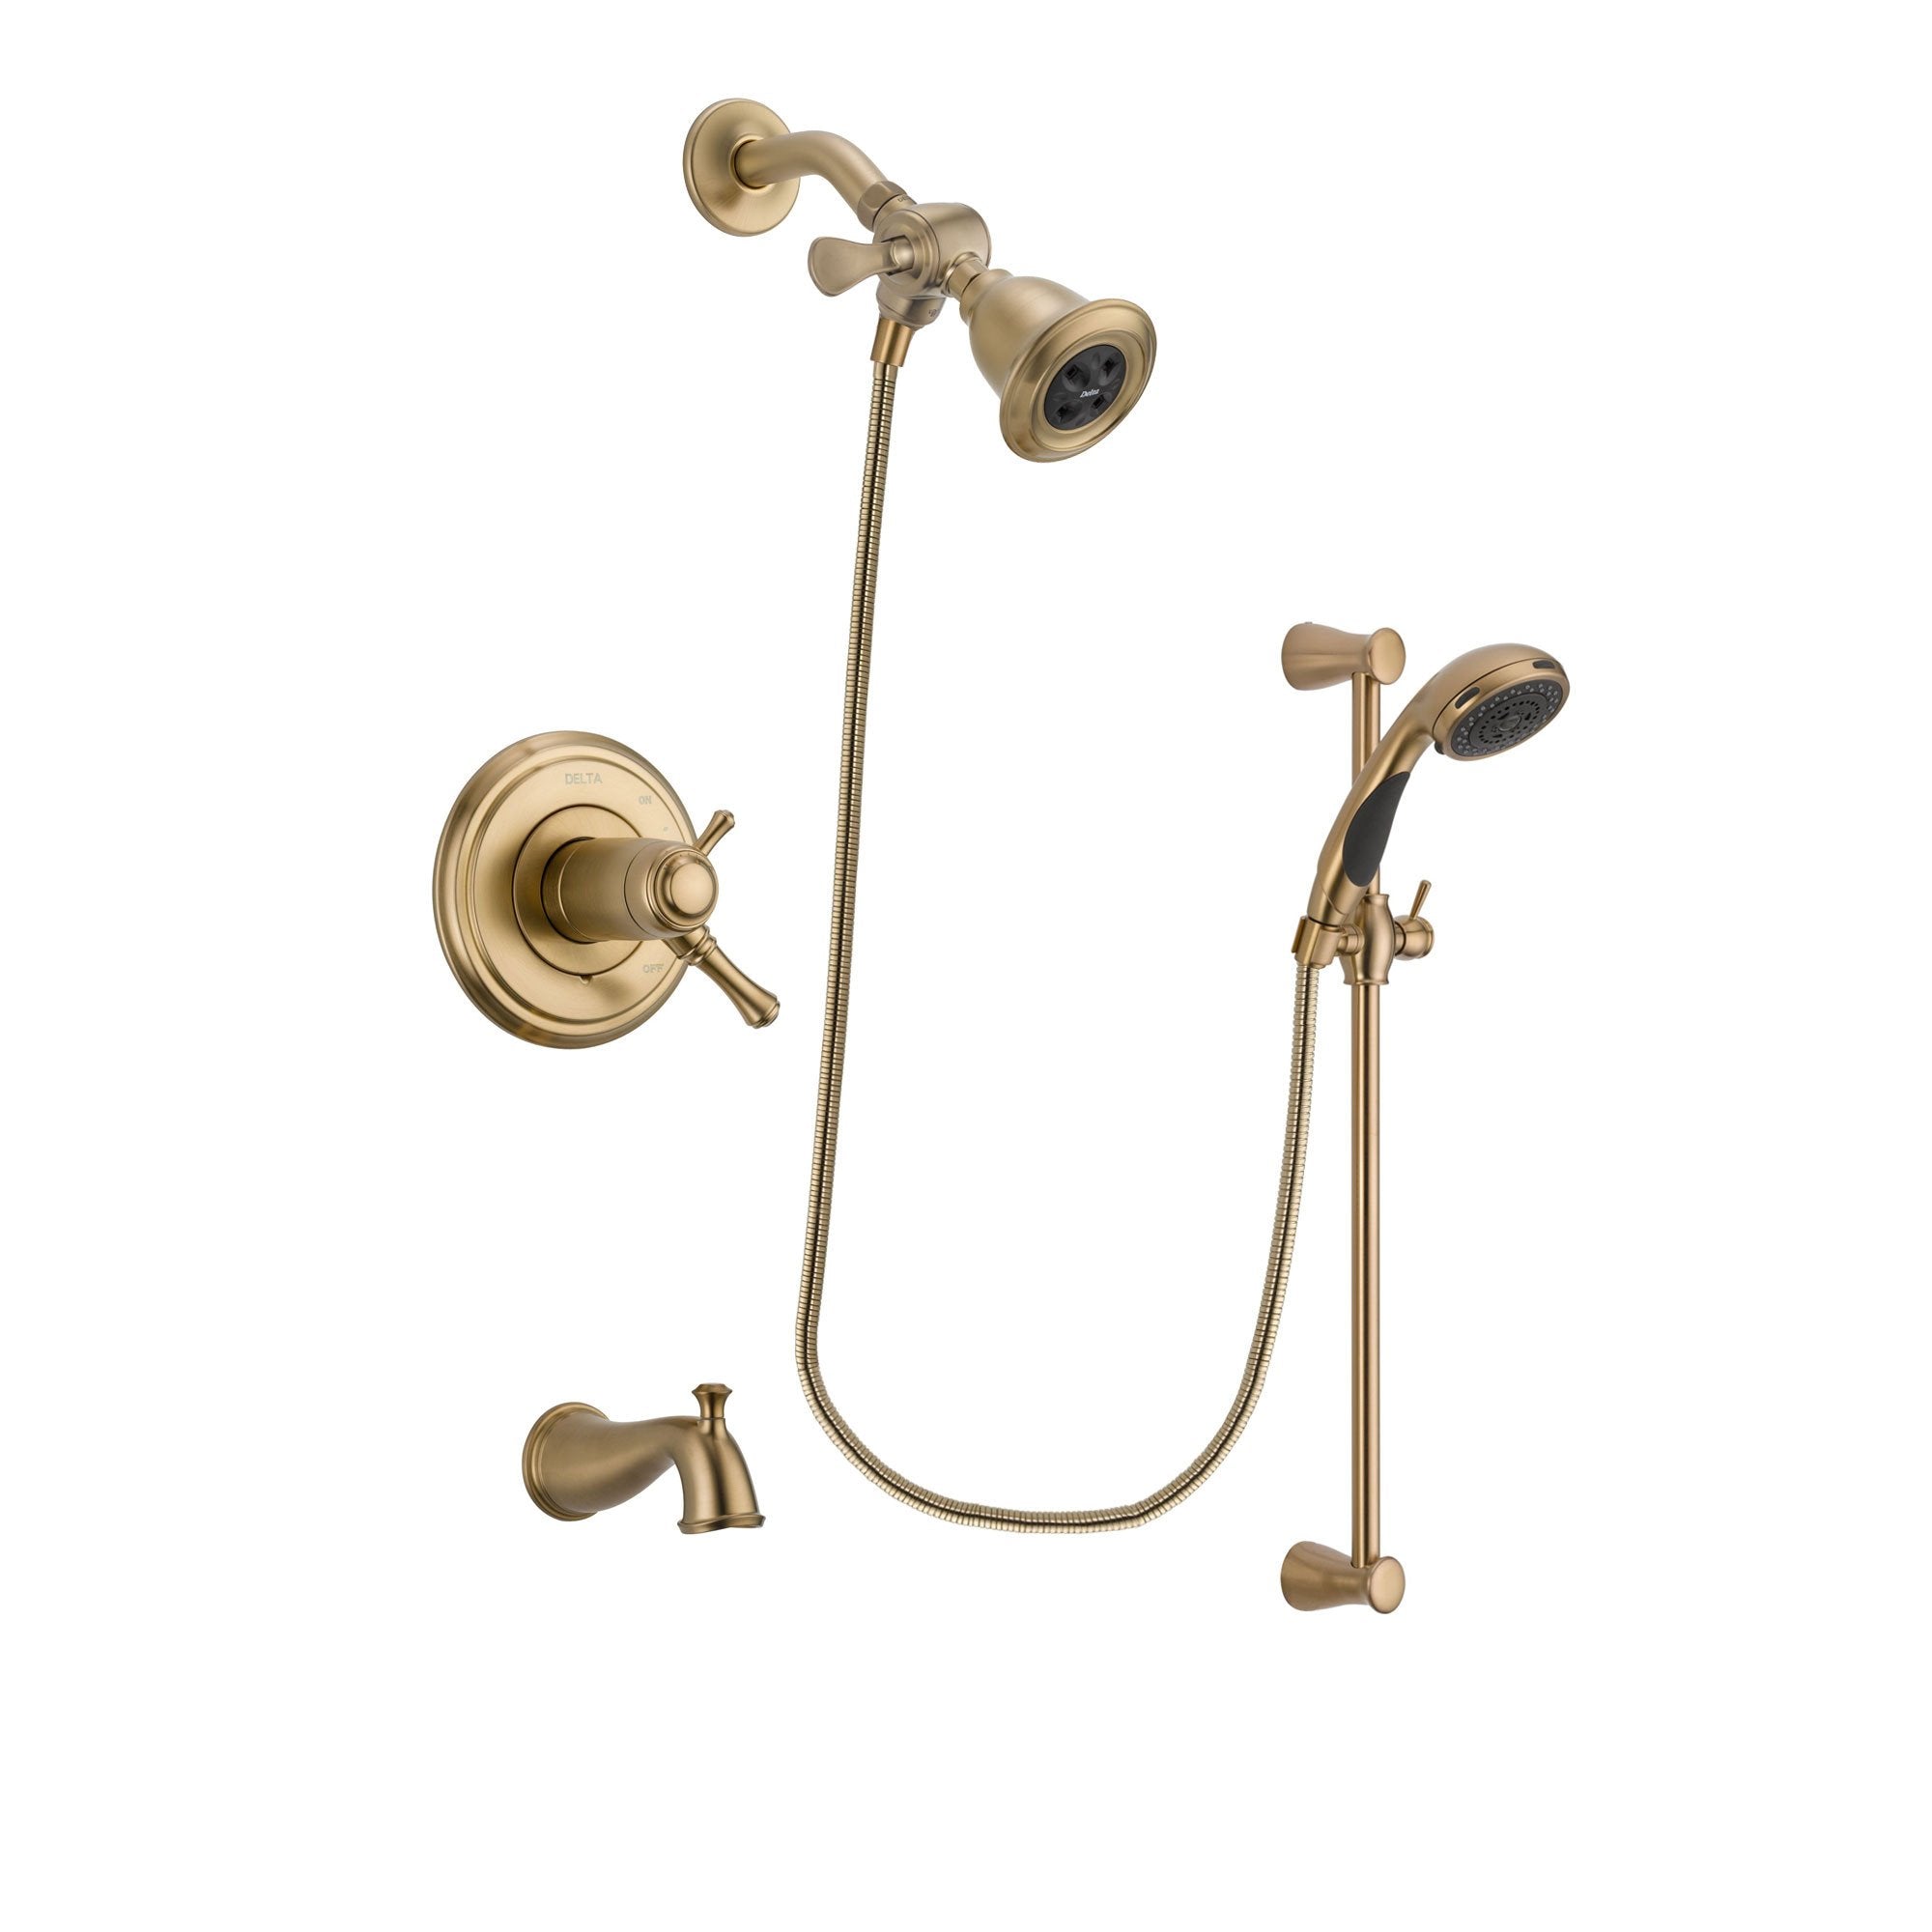 Delta Cassidy Champagne Bronze Finish Thermostatic Tub and Shower Faucet System Package with Water Efficient Showerhead and Personal Handheld Shower Sprayer with Slide Bar Includes Rough-in Valve and Tub Spout DSP3453V